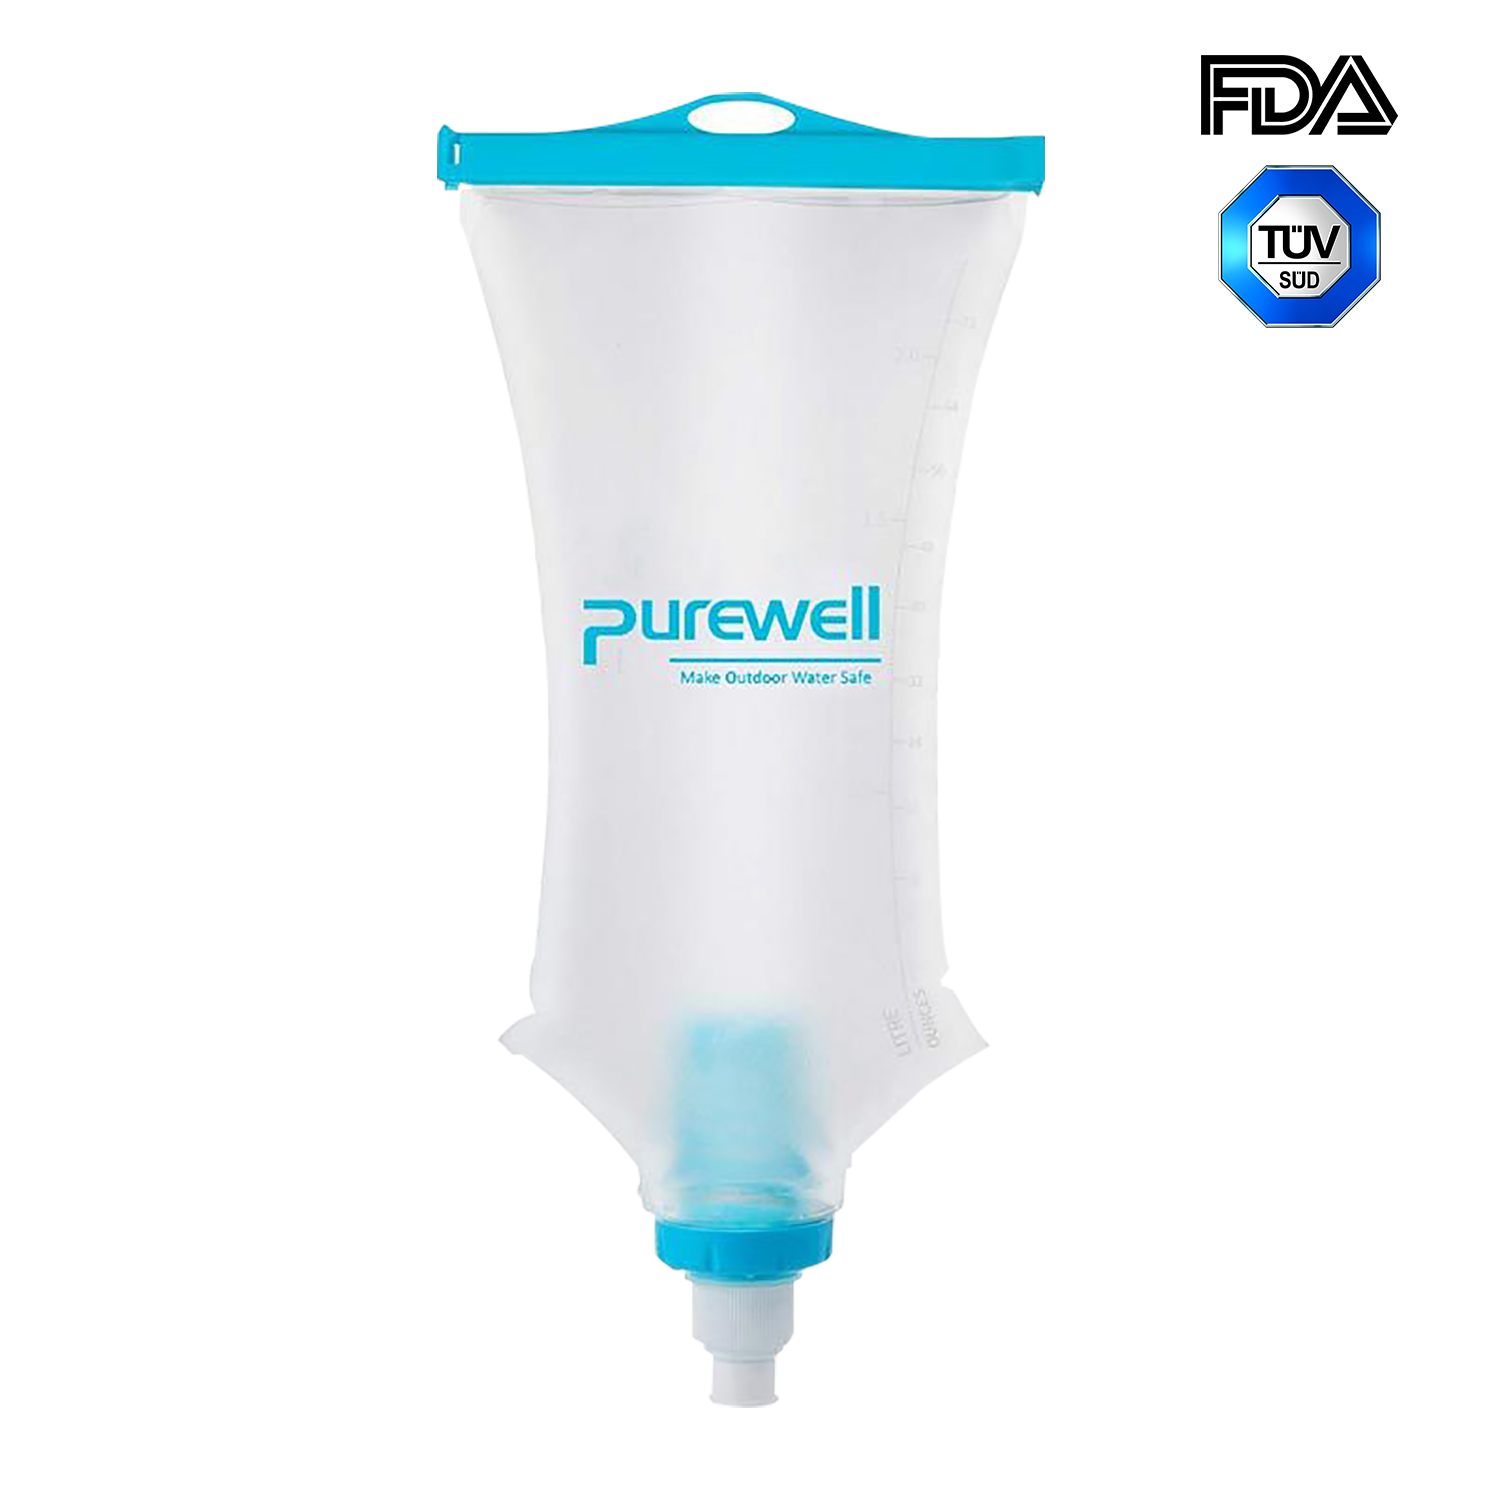 Purewell Array image2